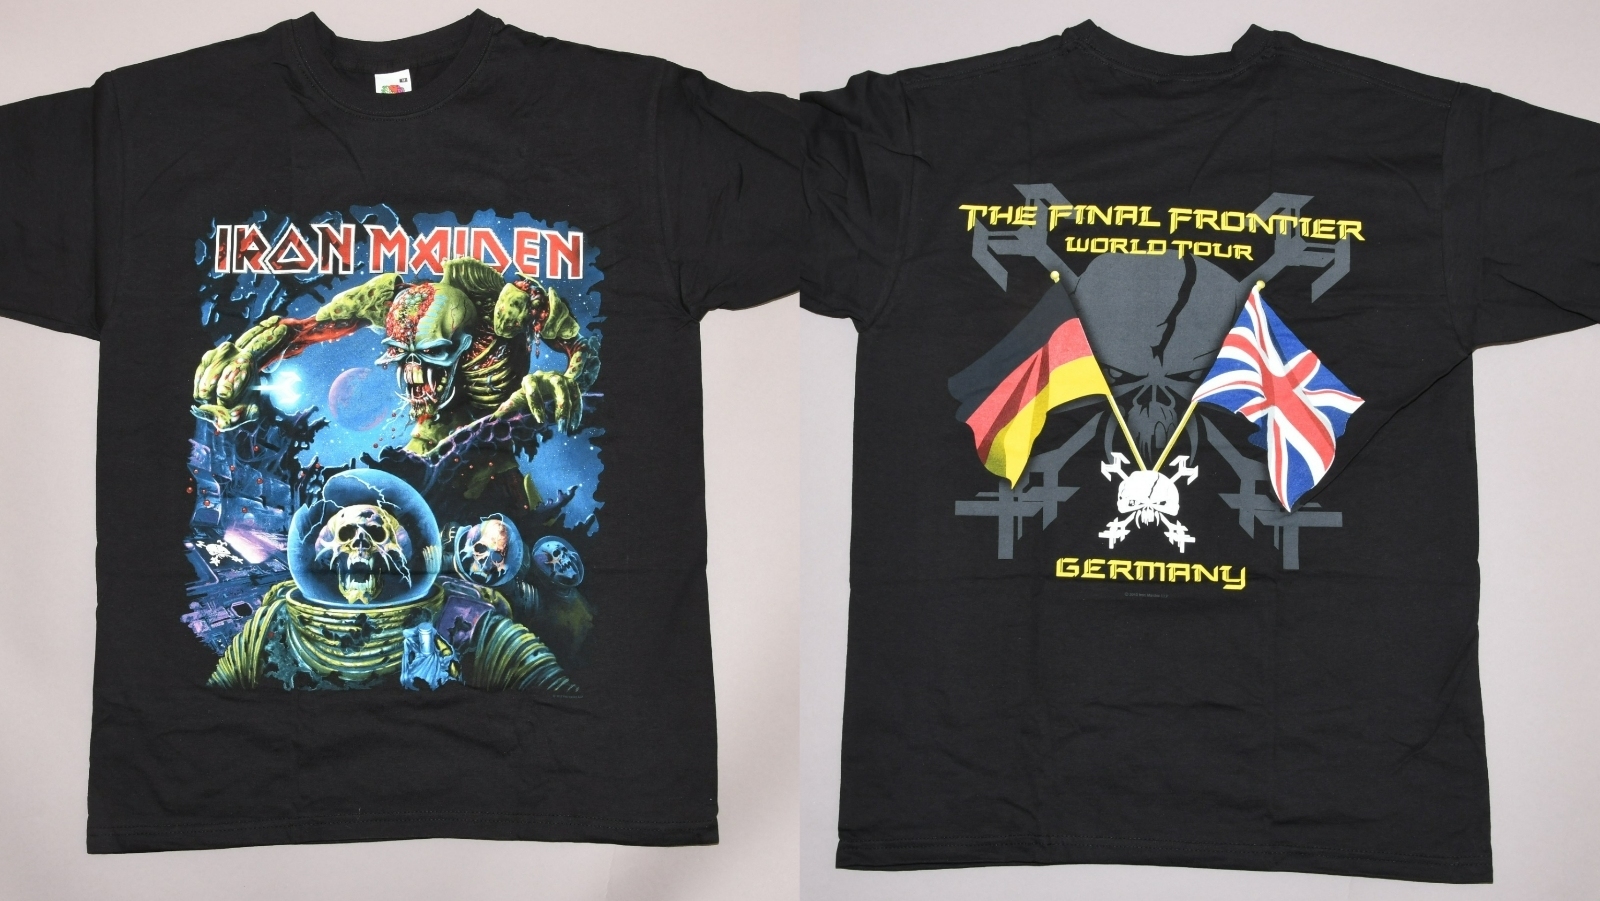 Police issued a fresh appeal to trace a man wearing an Iron Maiden T-shirt.